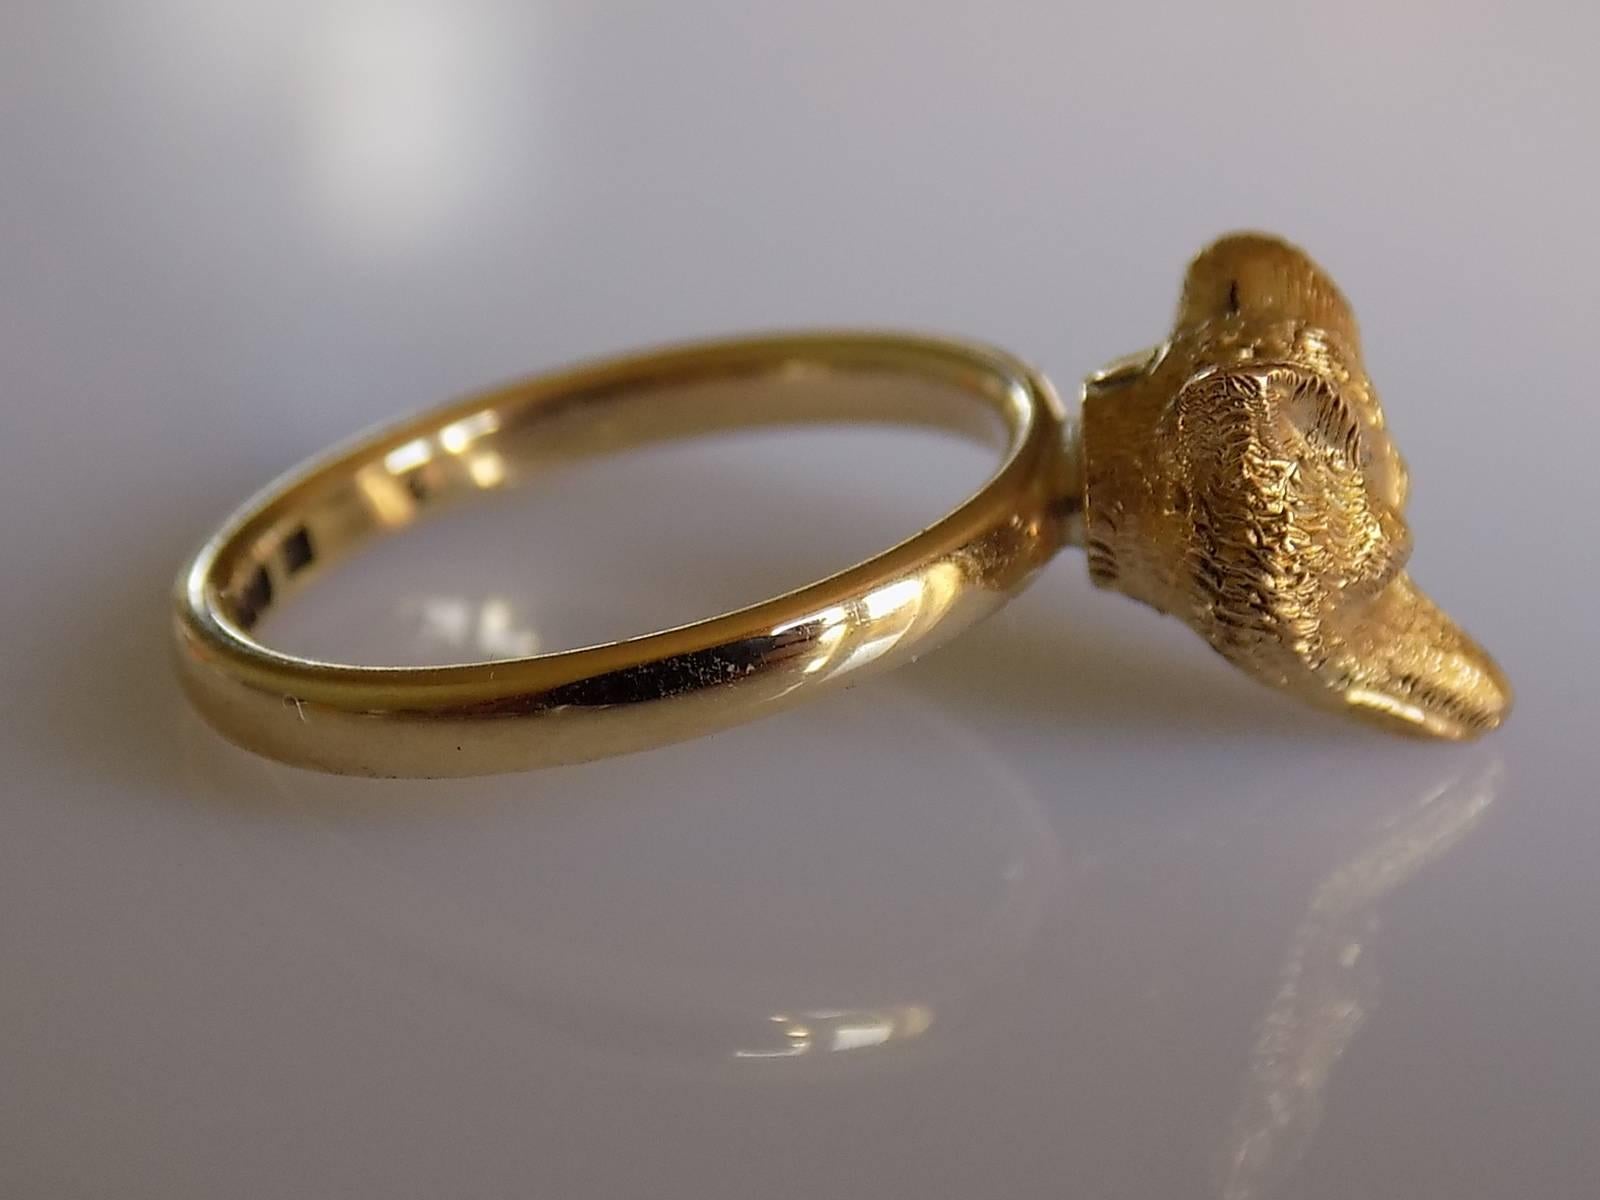 A Victorian Gold Fox head stick pin conversion ring on 9 Carat Gold shank. 
Size N 1/2 UK, 7.25 US.
Height of the face 12mm, Width 9mm.
Weight 3.5gr.
Shank fully hallmarked for 9 Carat Gold.
Very good condition and ready to wear.